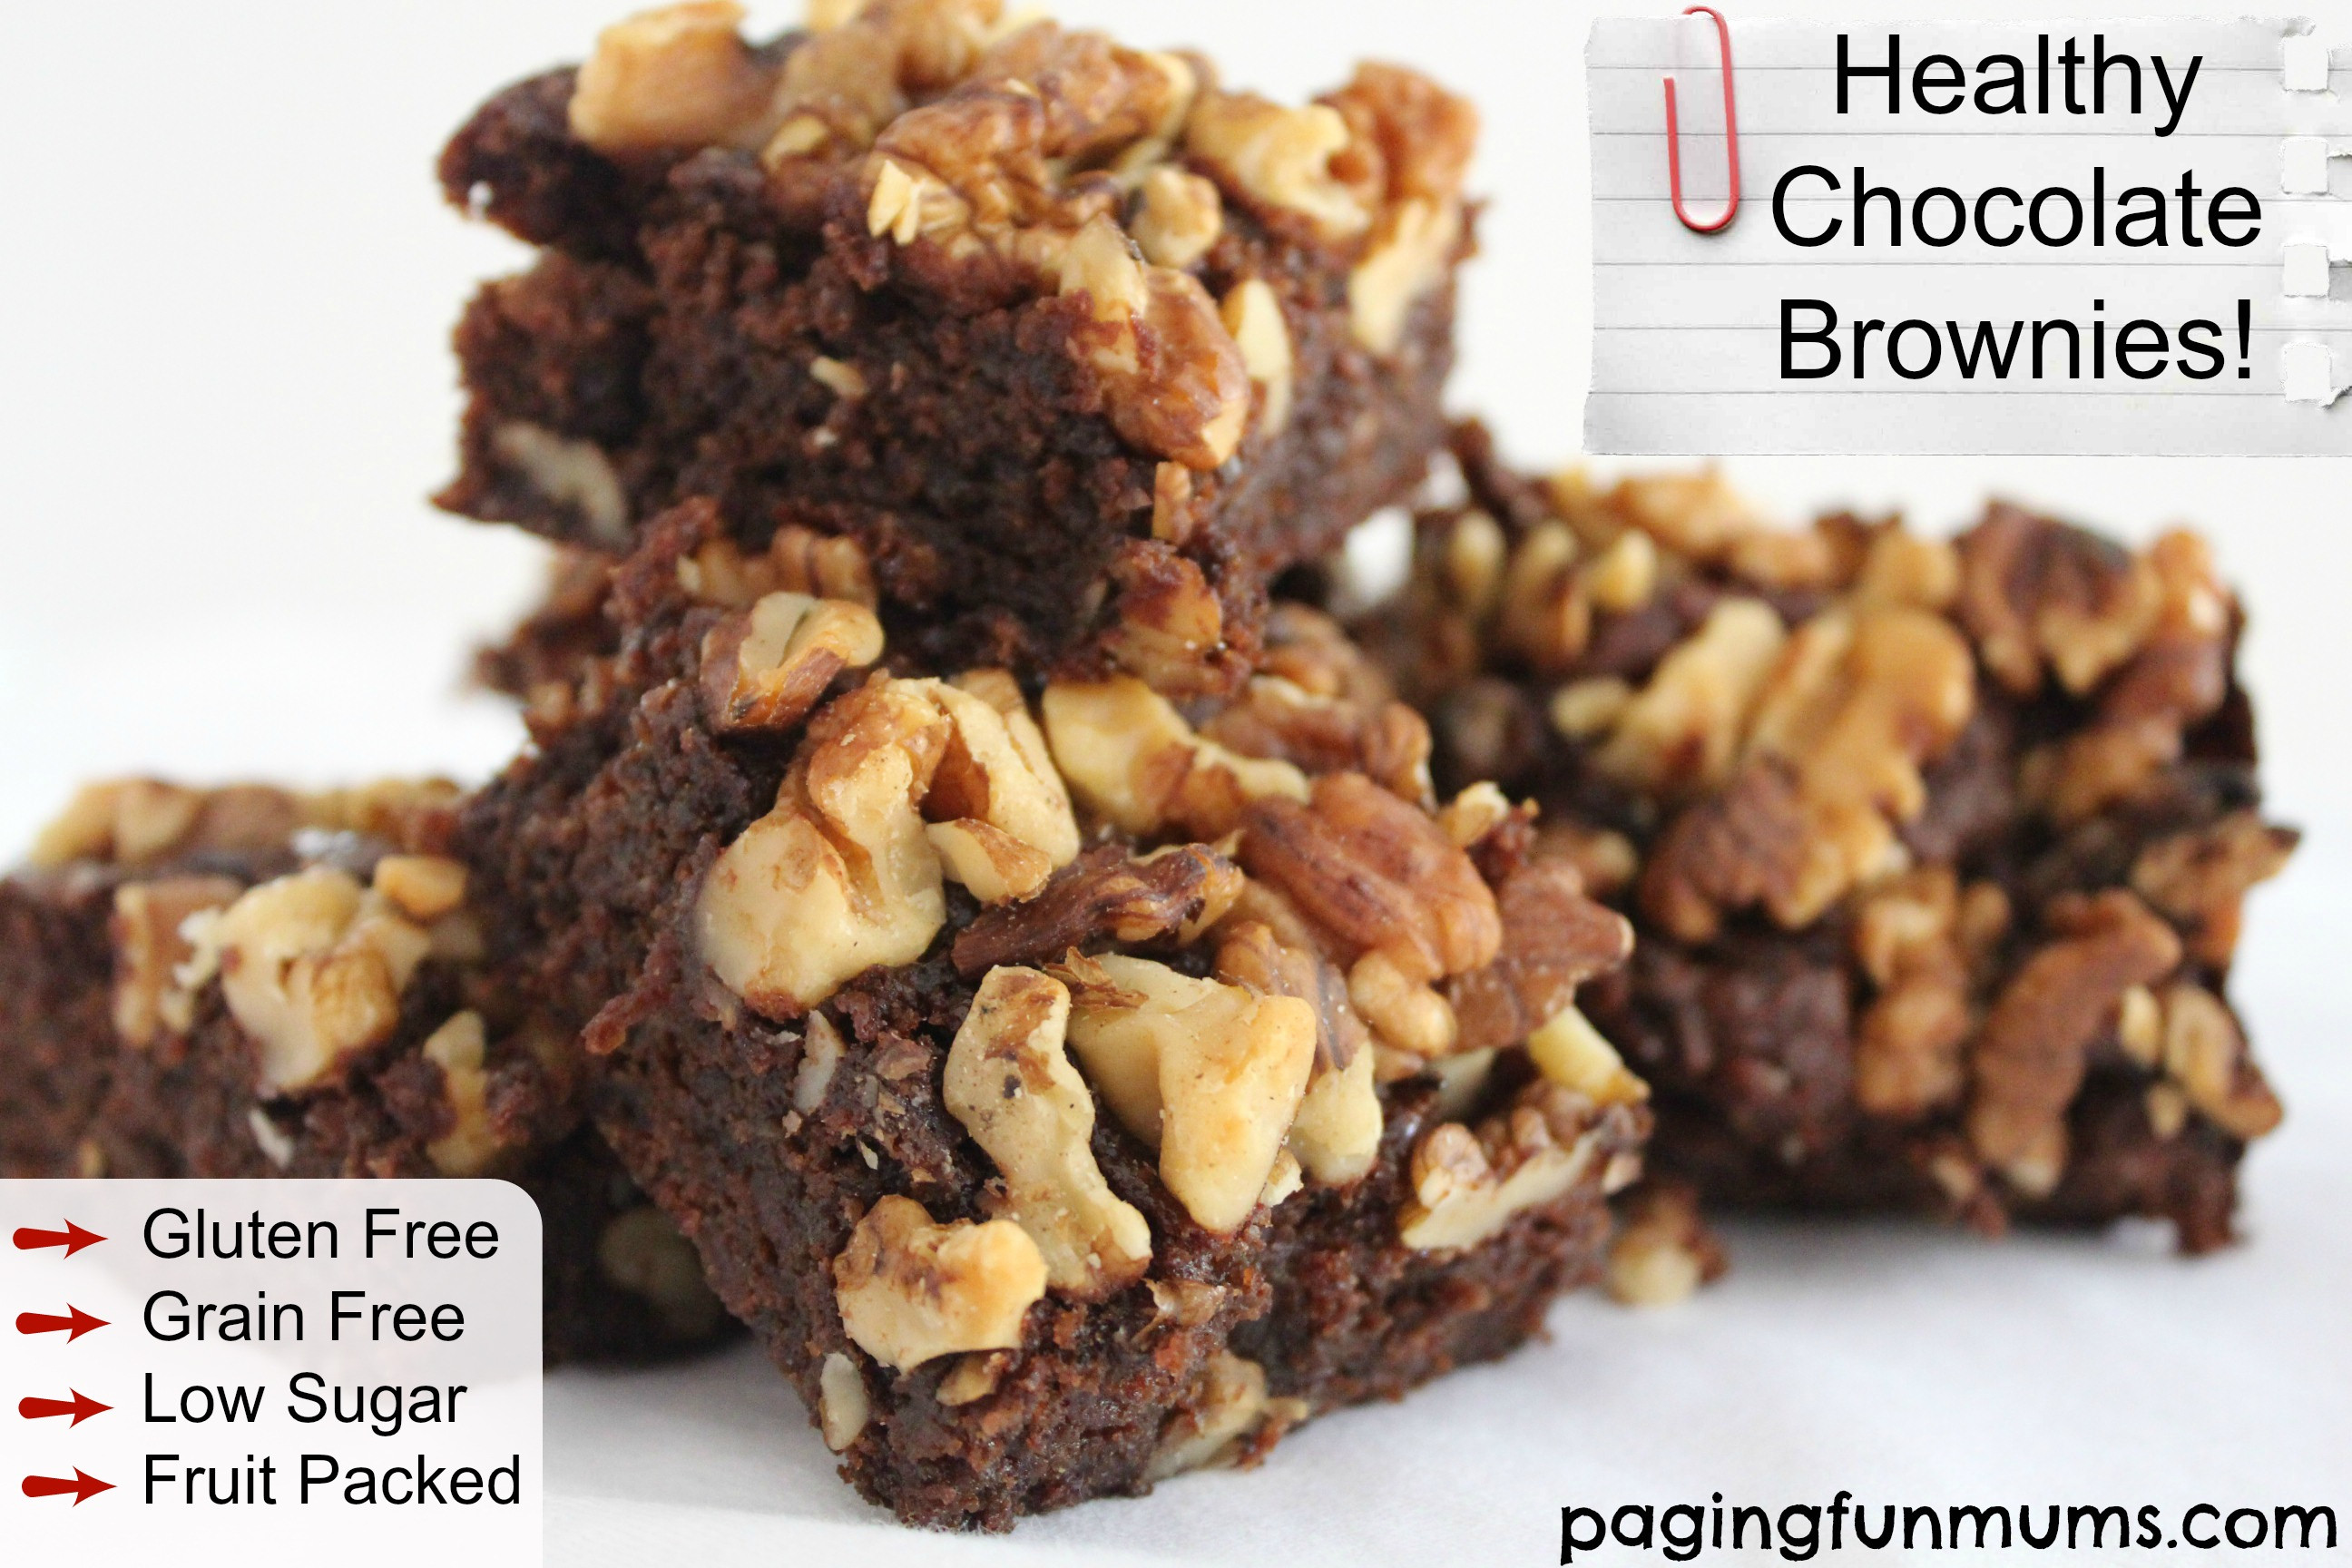 Healthy Chocolate Brownies
 Healthy Chocolate Brownies great for kids lunchboxes